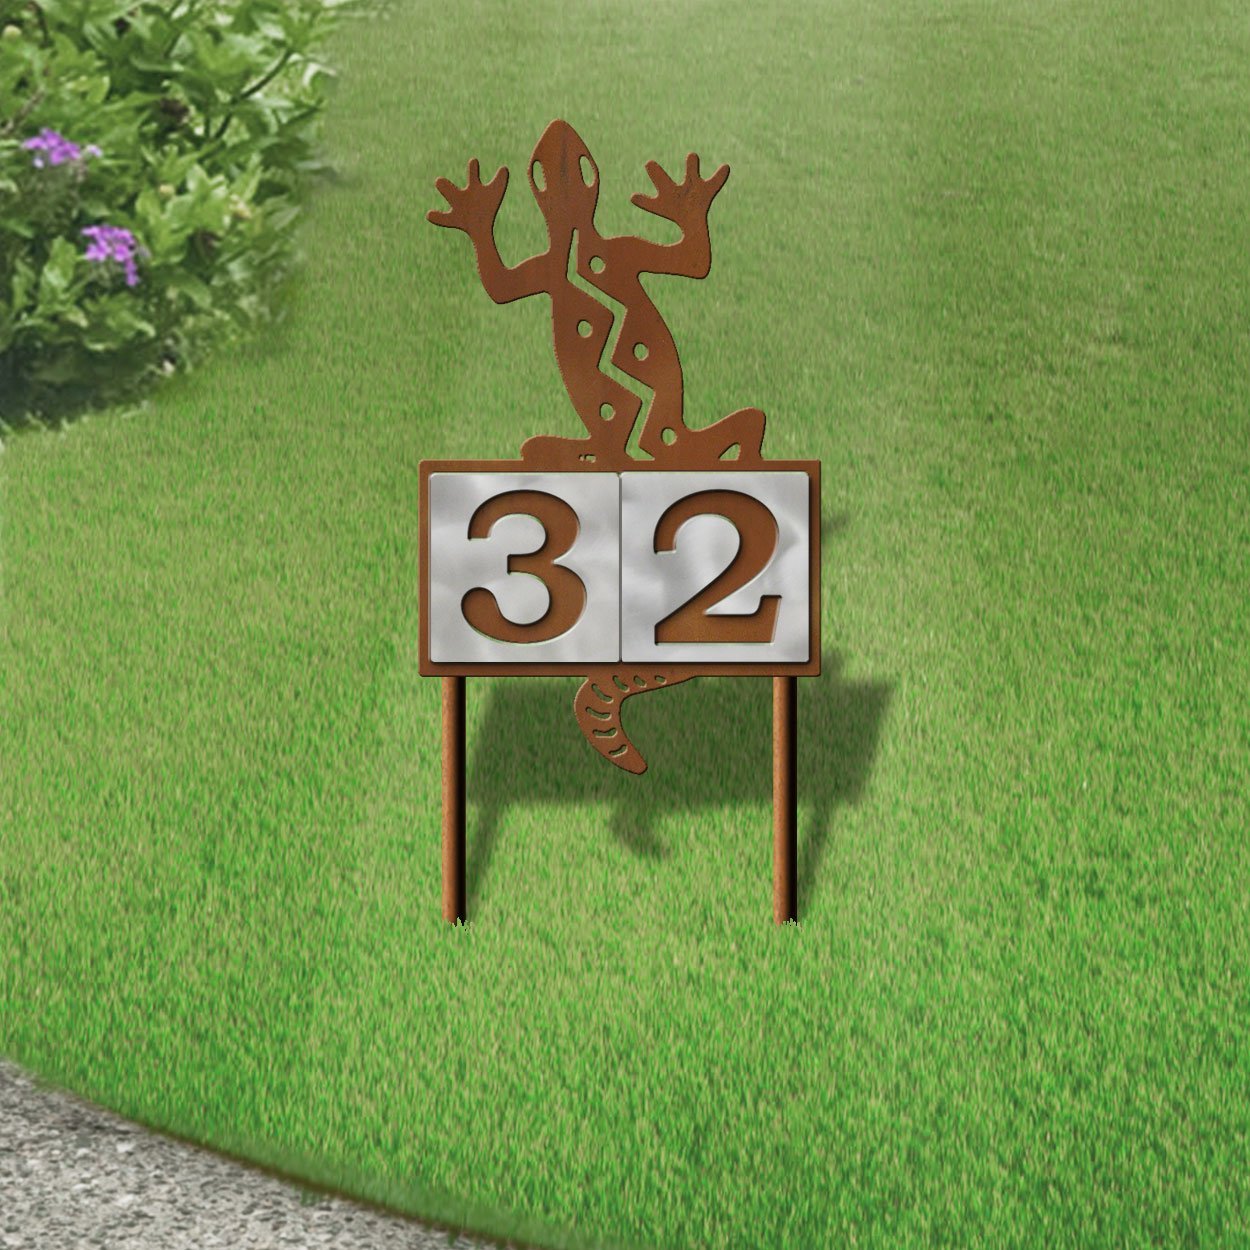 610232 - S-Shaped Southwest Lizard Design 2-Digit Horizontal 6-inch Tile Outdoor House Numbers Yard Sign